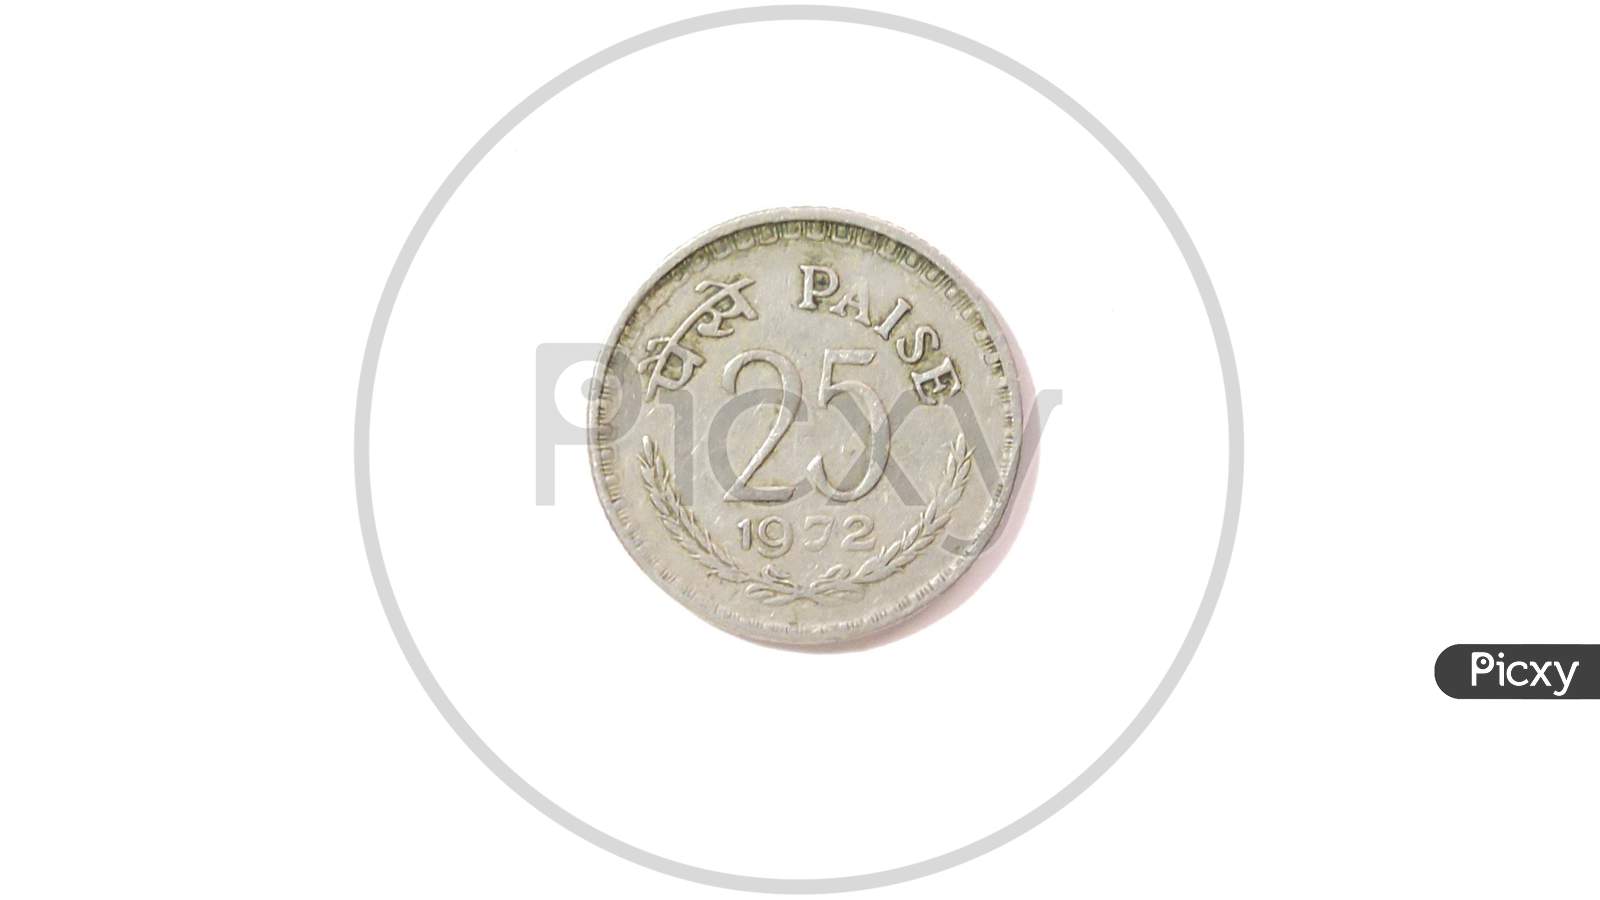 Indian 25 paisa coin of 1972